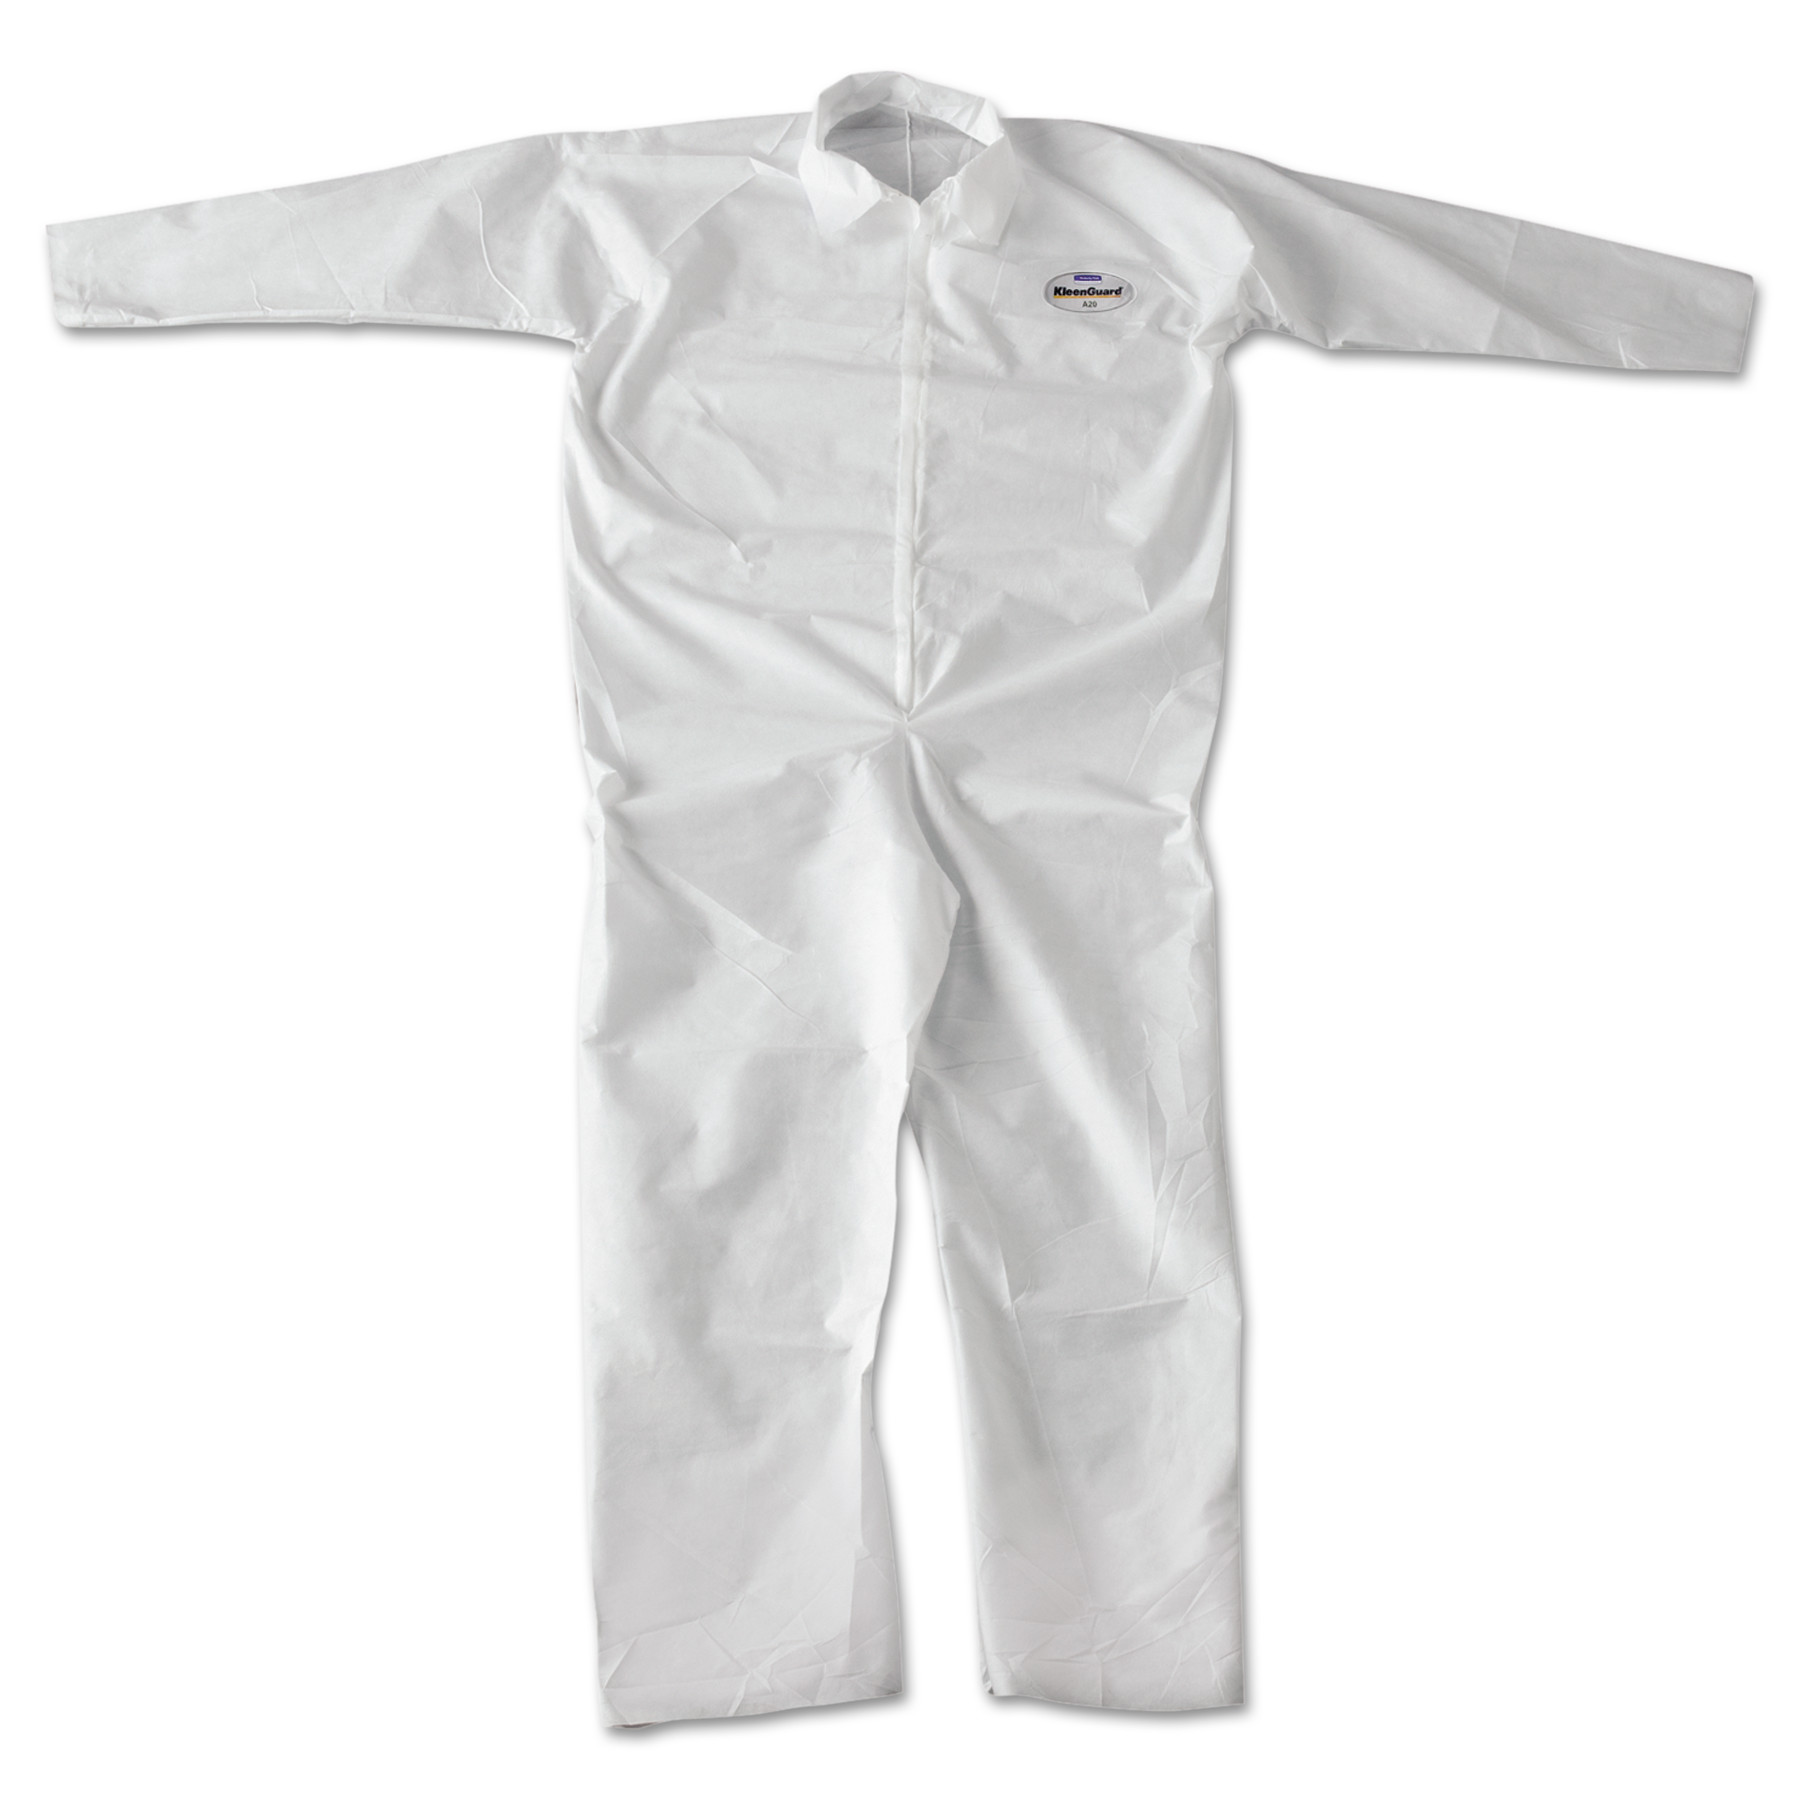 KLEENGUARD* A20 BREATHABLE PARTICLE PROTECTION COVERALLS, ZIPPER FRONT, WHITE, XX-LARGE